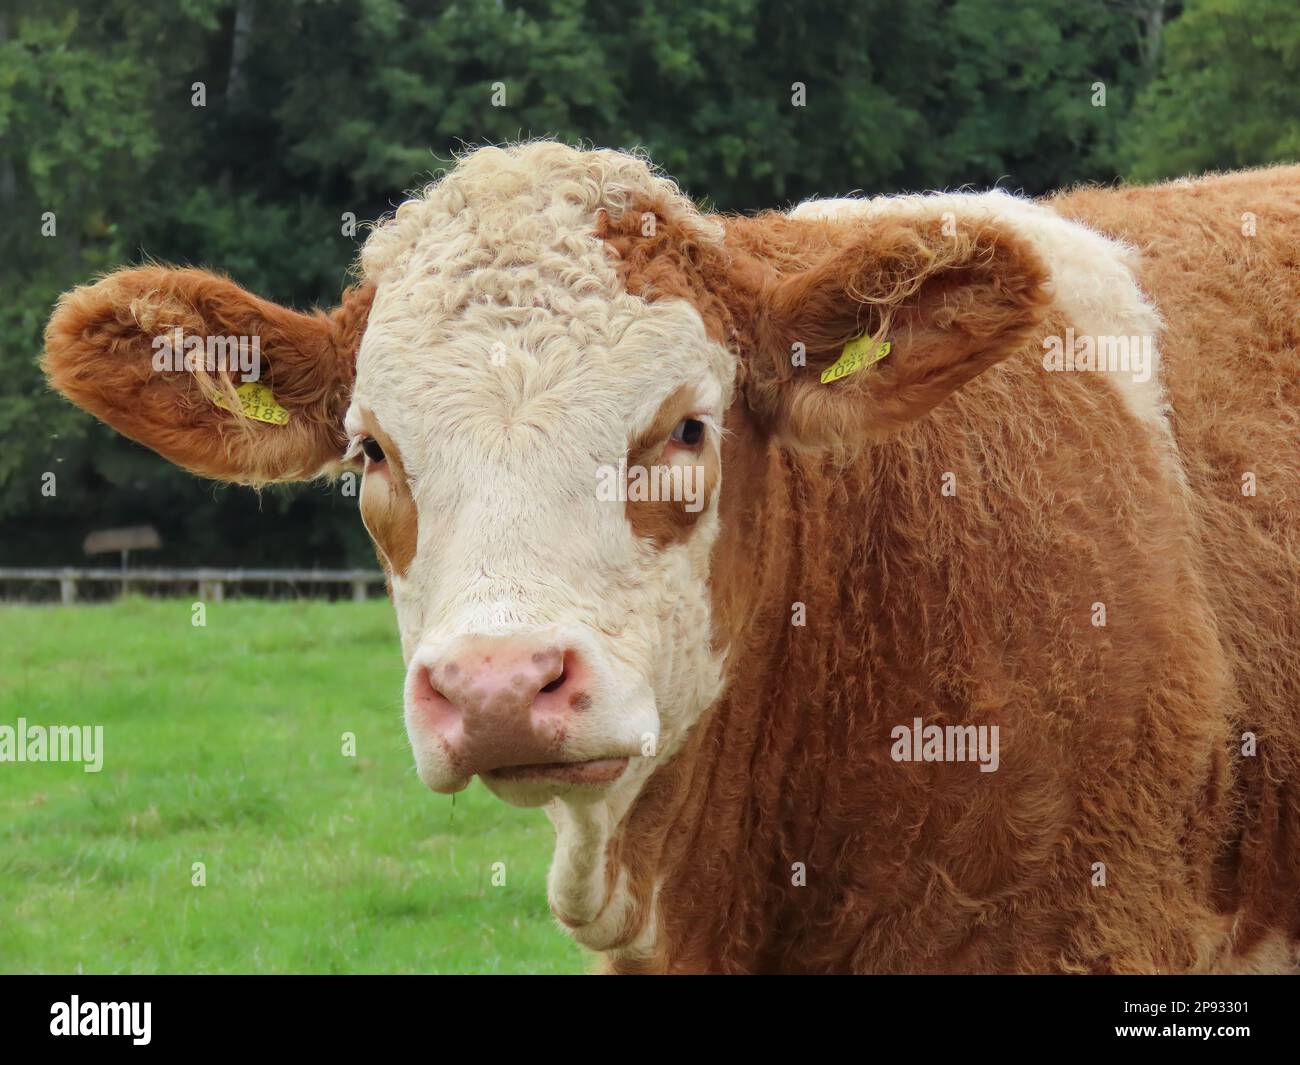 close up portrait of a brown and white cow Stock Photo